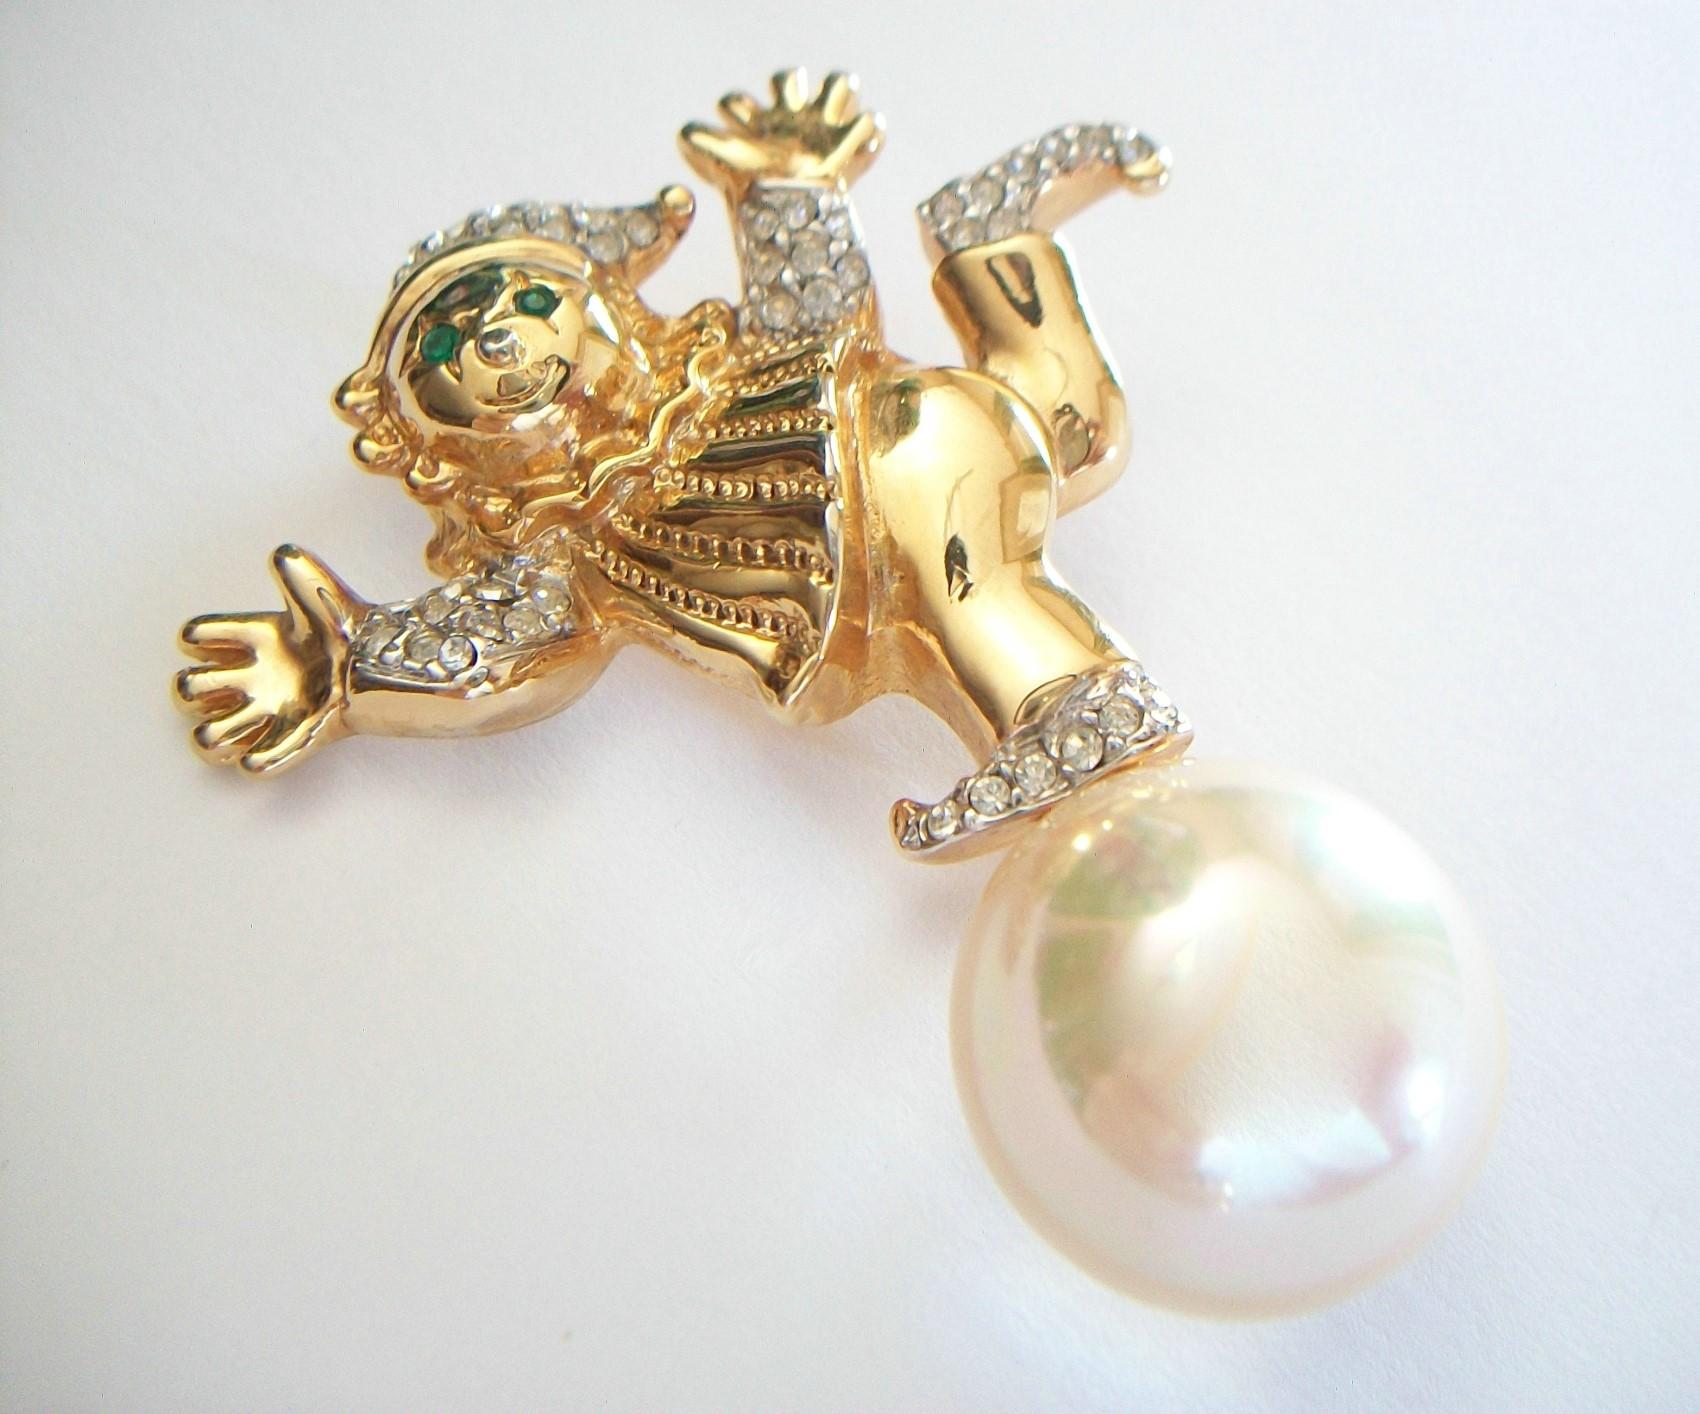 Courrèges Paris - Vintage whimsical faux Mabe pearl brooch - featuring a balancing figure on a ball - yellow gold tone body - white gold tone shoes, cuffs and hat set with rhinestones - original pin with safety catch to the back - signed - France -